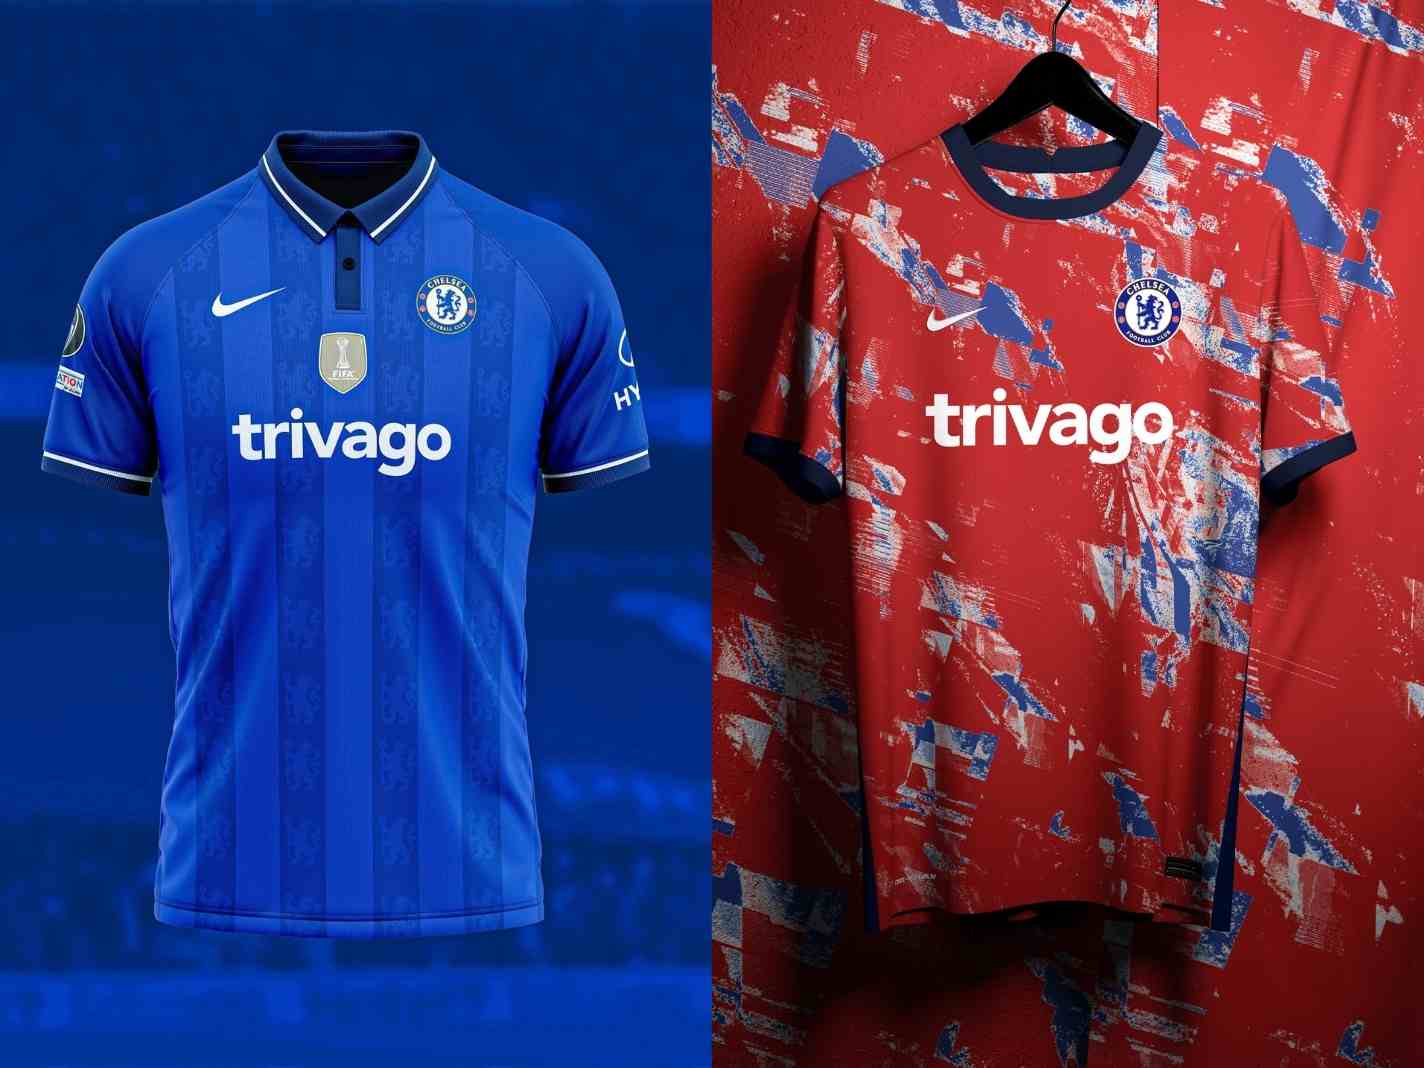 The photo shows Chelsea concept kits with Trivago as main sponsor.